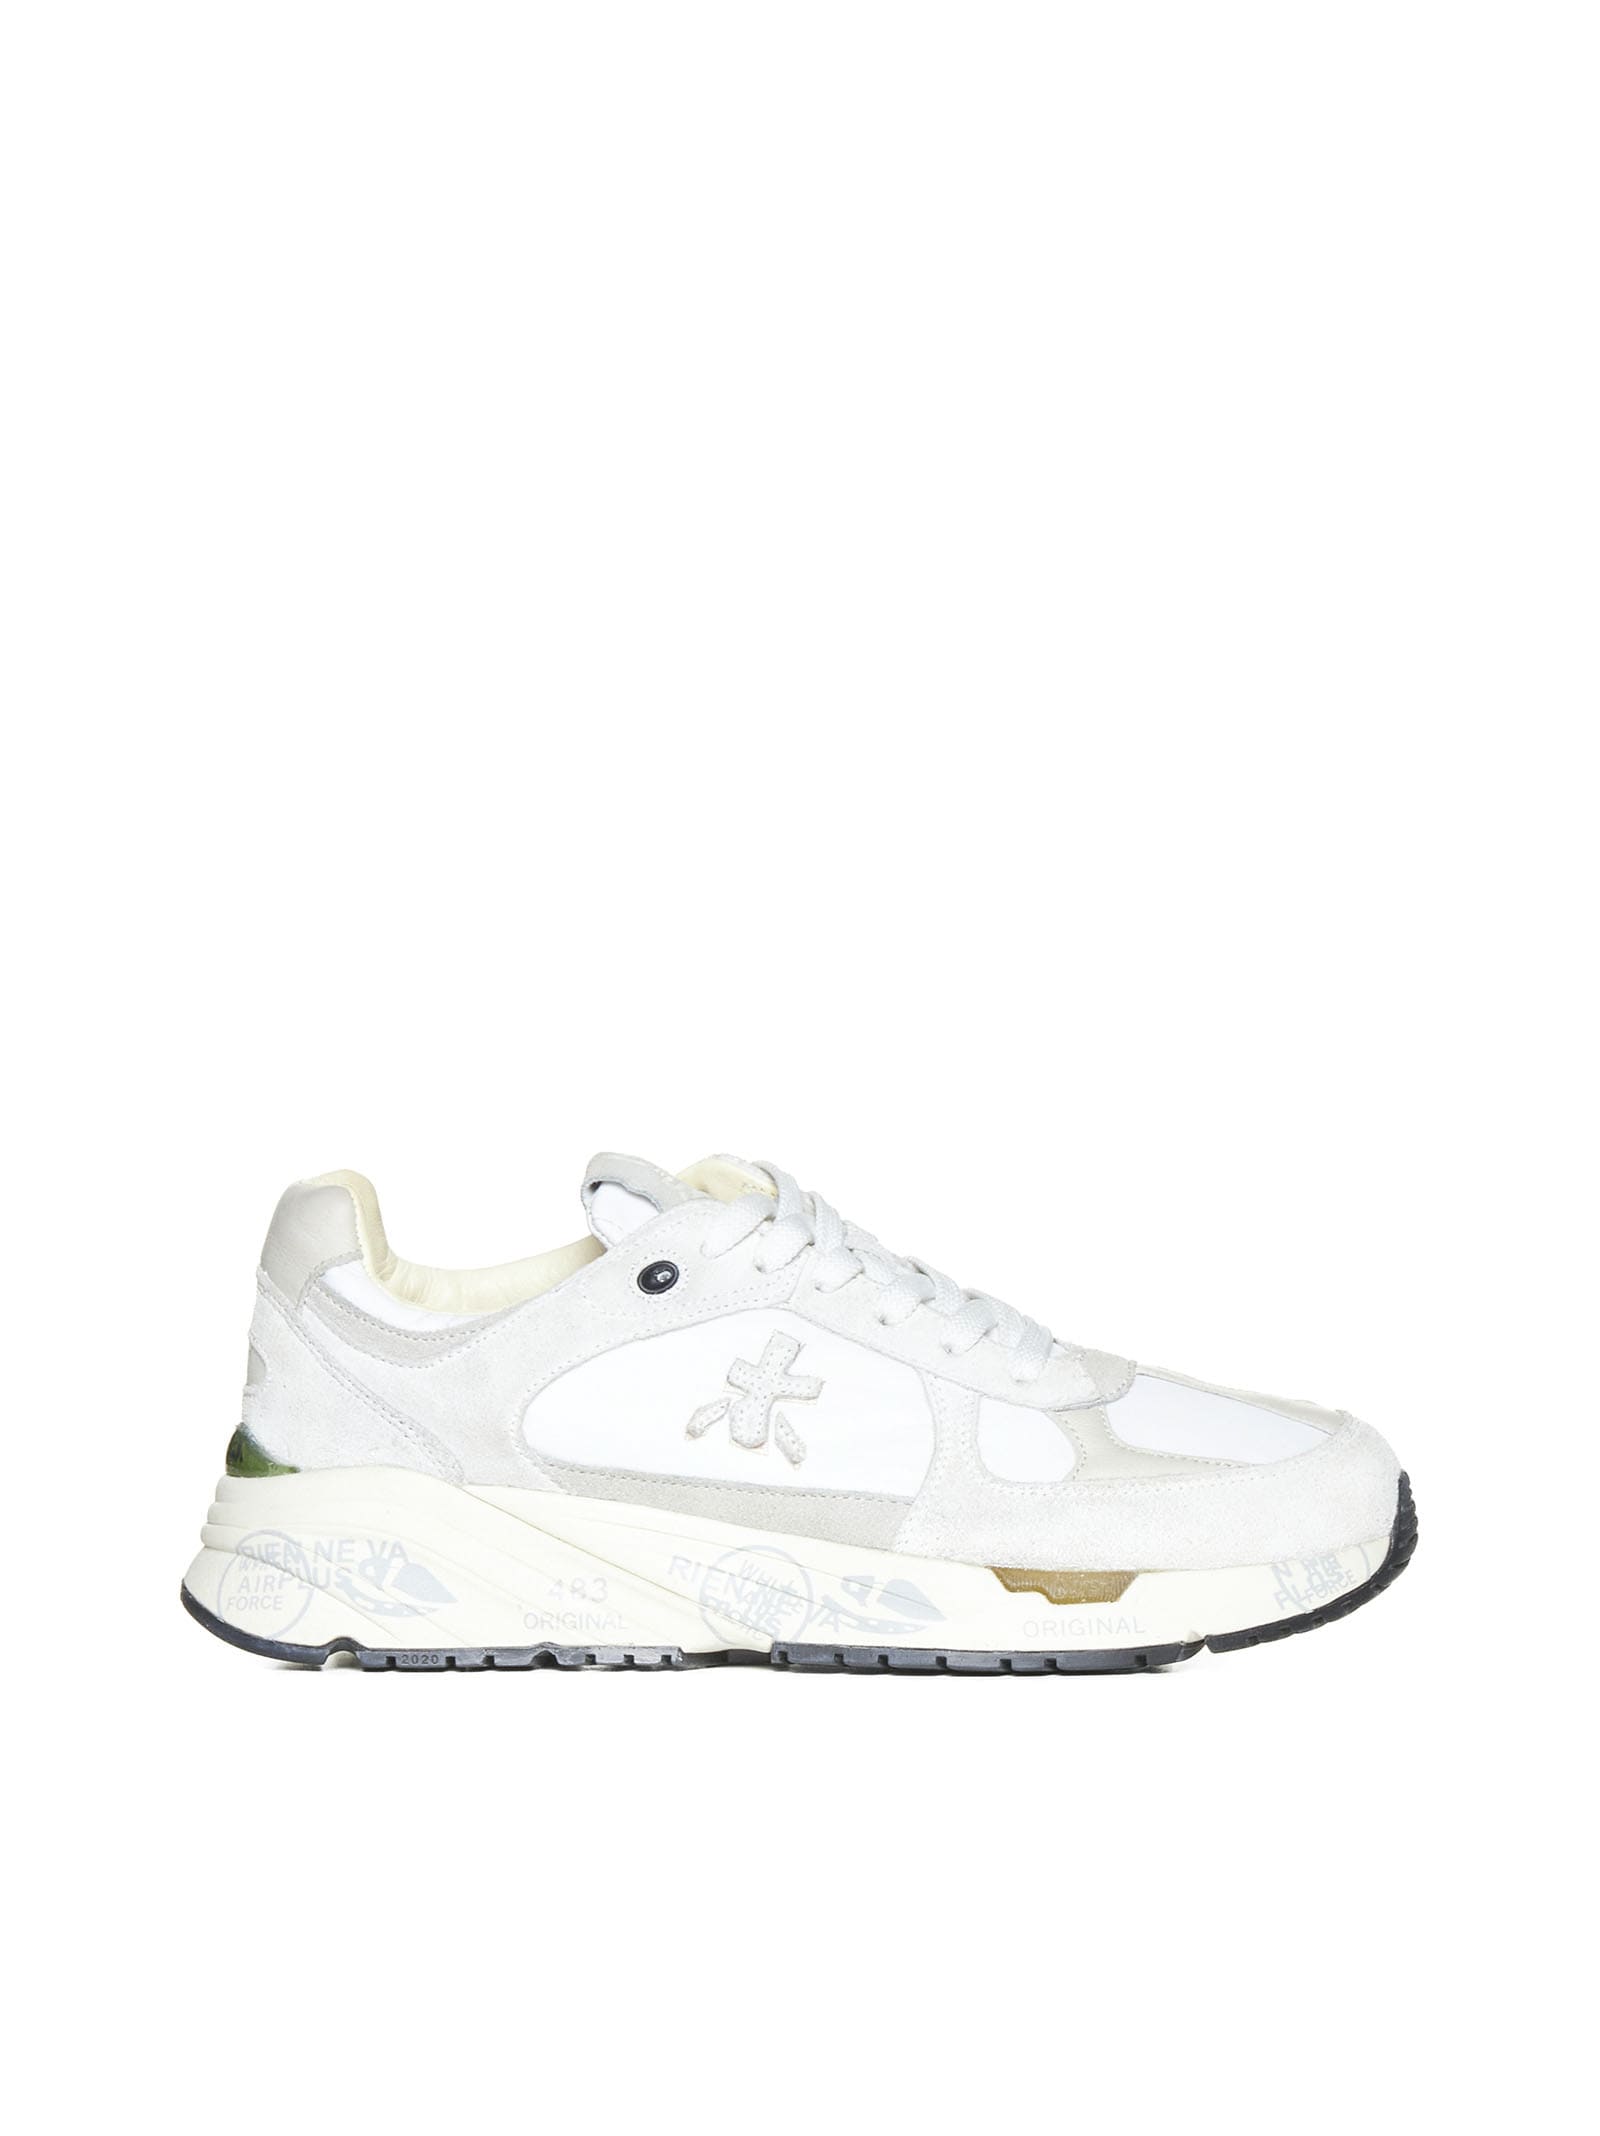 PREMIATA MASE SNEAKERS IN WHITE SUEDE AND FABRIC